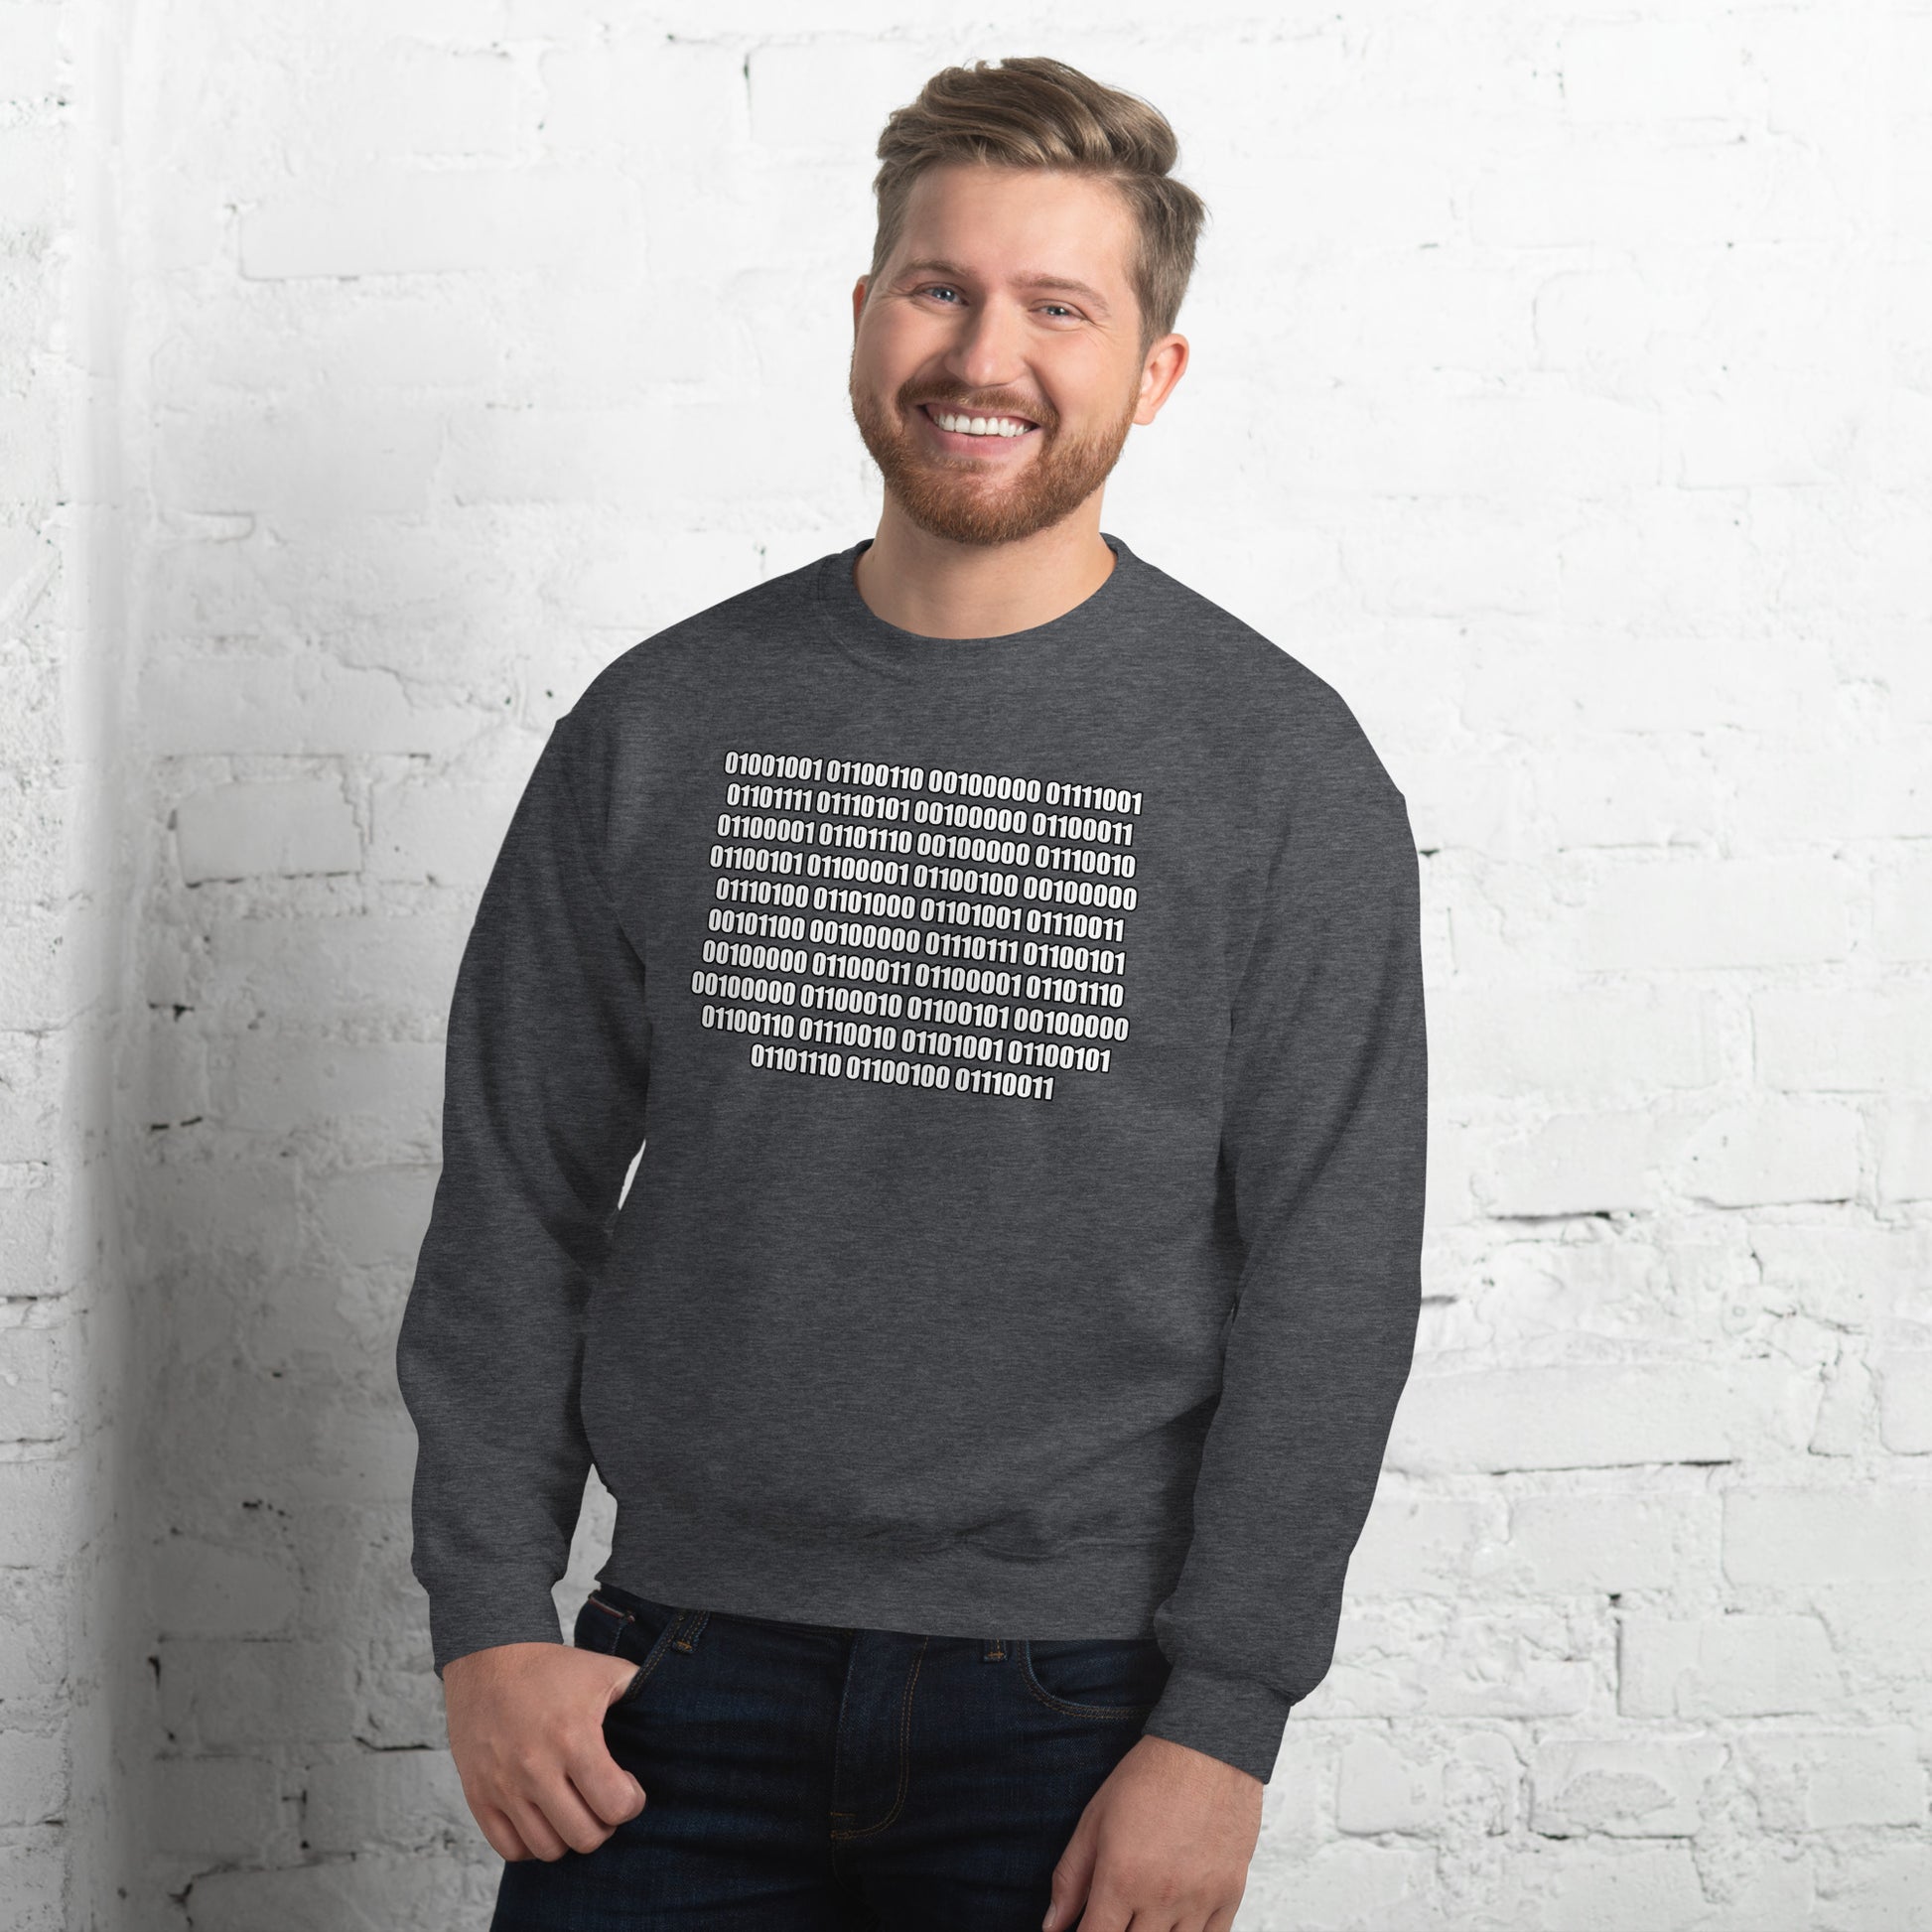 Men with dark heather sweatshirt with binaire text "If you can read this"